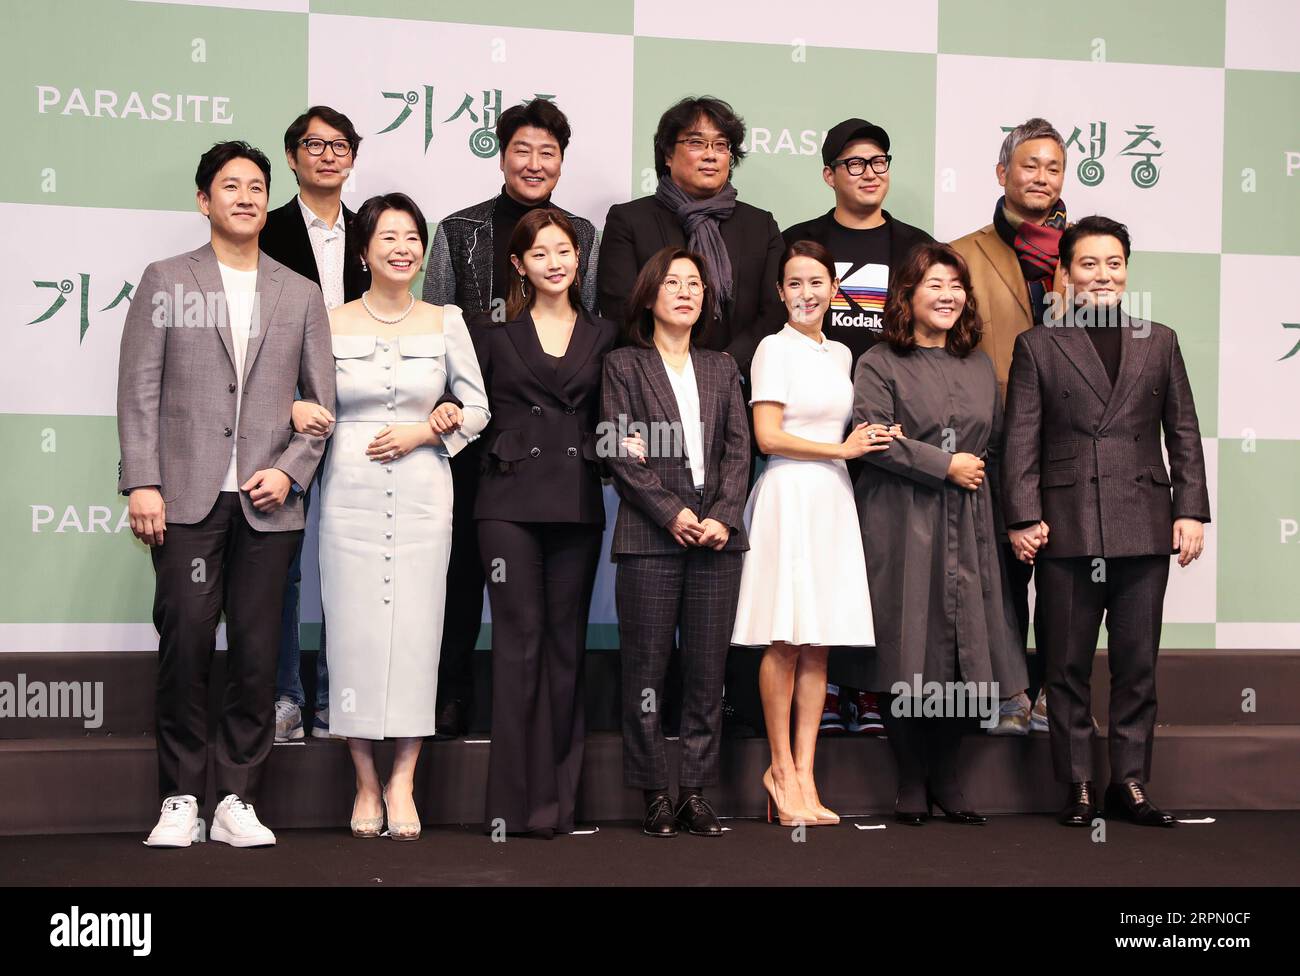 200219 -- SEOUL, Feb. 19, 2020 -- The cast and creative team of South Korean film Parasite pose for a group photo at a press conference in Seoul, South Korea, Feb. 19, 2020. Parasite , a South Korean black comedy, became the first non-English language film to win the Oscar for best picture, and also nabbed awards for best original screenplay, best international feature film and best director for Bong Joon-ho at the 92nd Academy Awards on Feb. 9, 2020.  SOUTH KOREA-SEOUL-PARASITE-CREATIVE TEAM-PRESS CONFERENCE WangxJingqiang PUBLICATIONxNOTxINxCHN Stock Photo